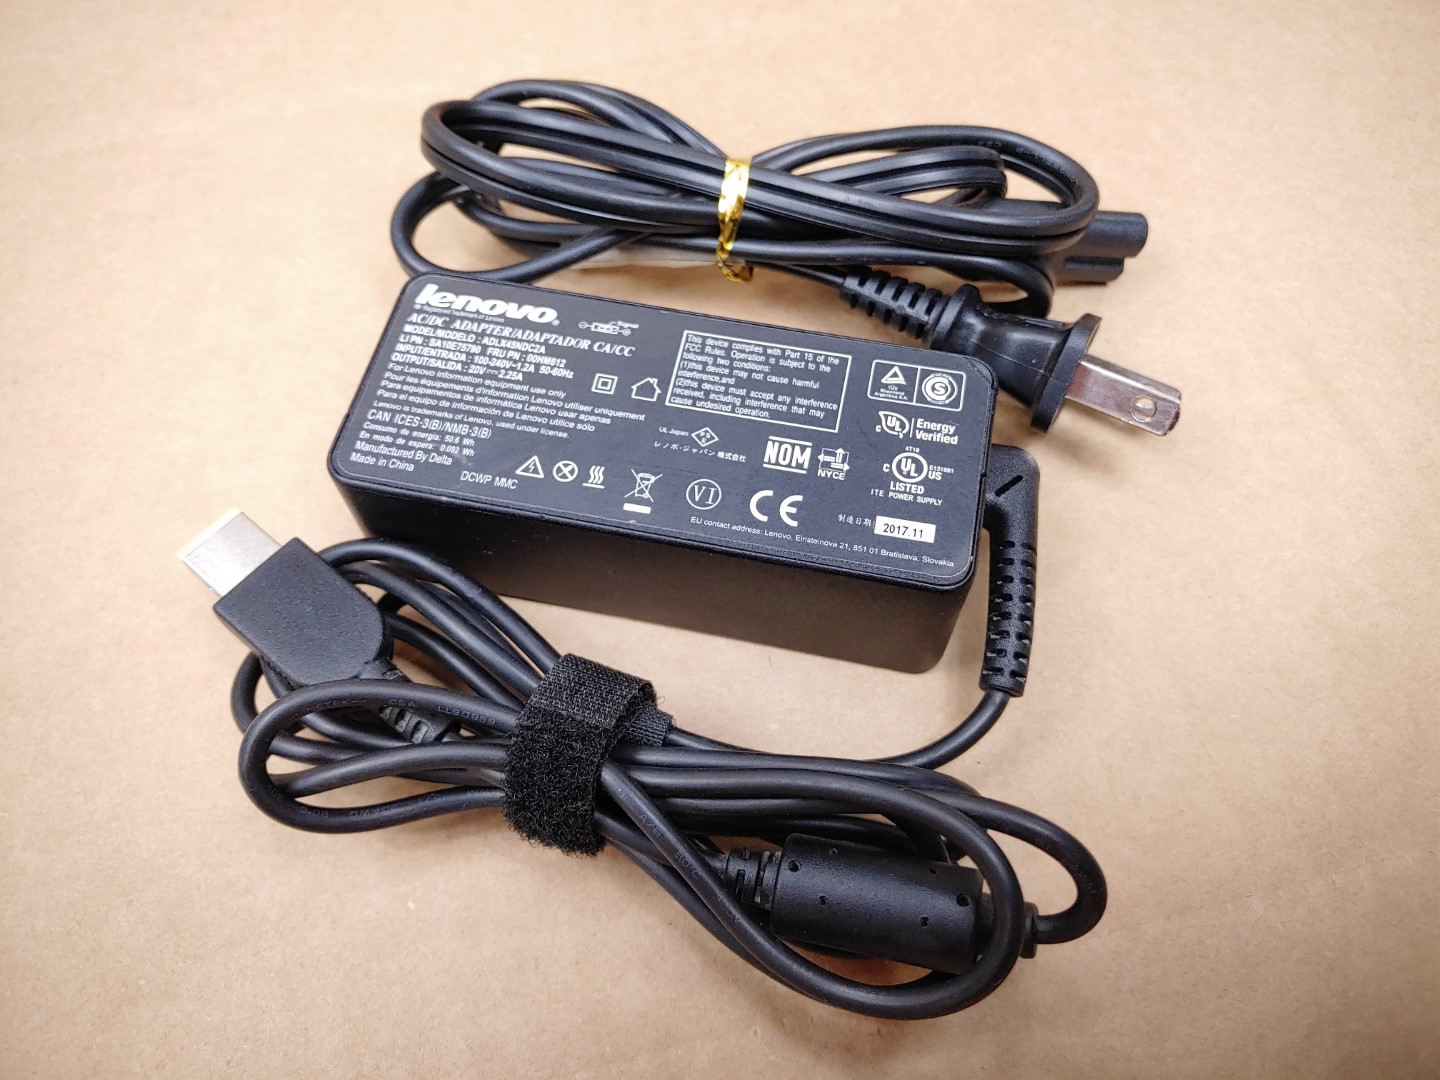 Great Condition! Tested and pulled from a working environment! **OEM POWER ADAPTER INCLUDED**Item Specifics: MPN : DK1523UPC : N/ACompatible Brand : For LenovoCompatible Product Line : For Lenovo ThinkPadCompatible Model : For LenovoPorts/Interfaces : USB 3.0Brand : LenovoModel : ThinkPad USB 3.0 Ultra DockType : Docking Station - 2